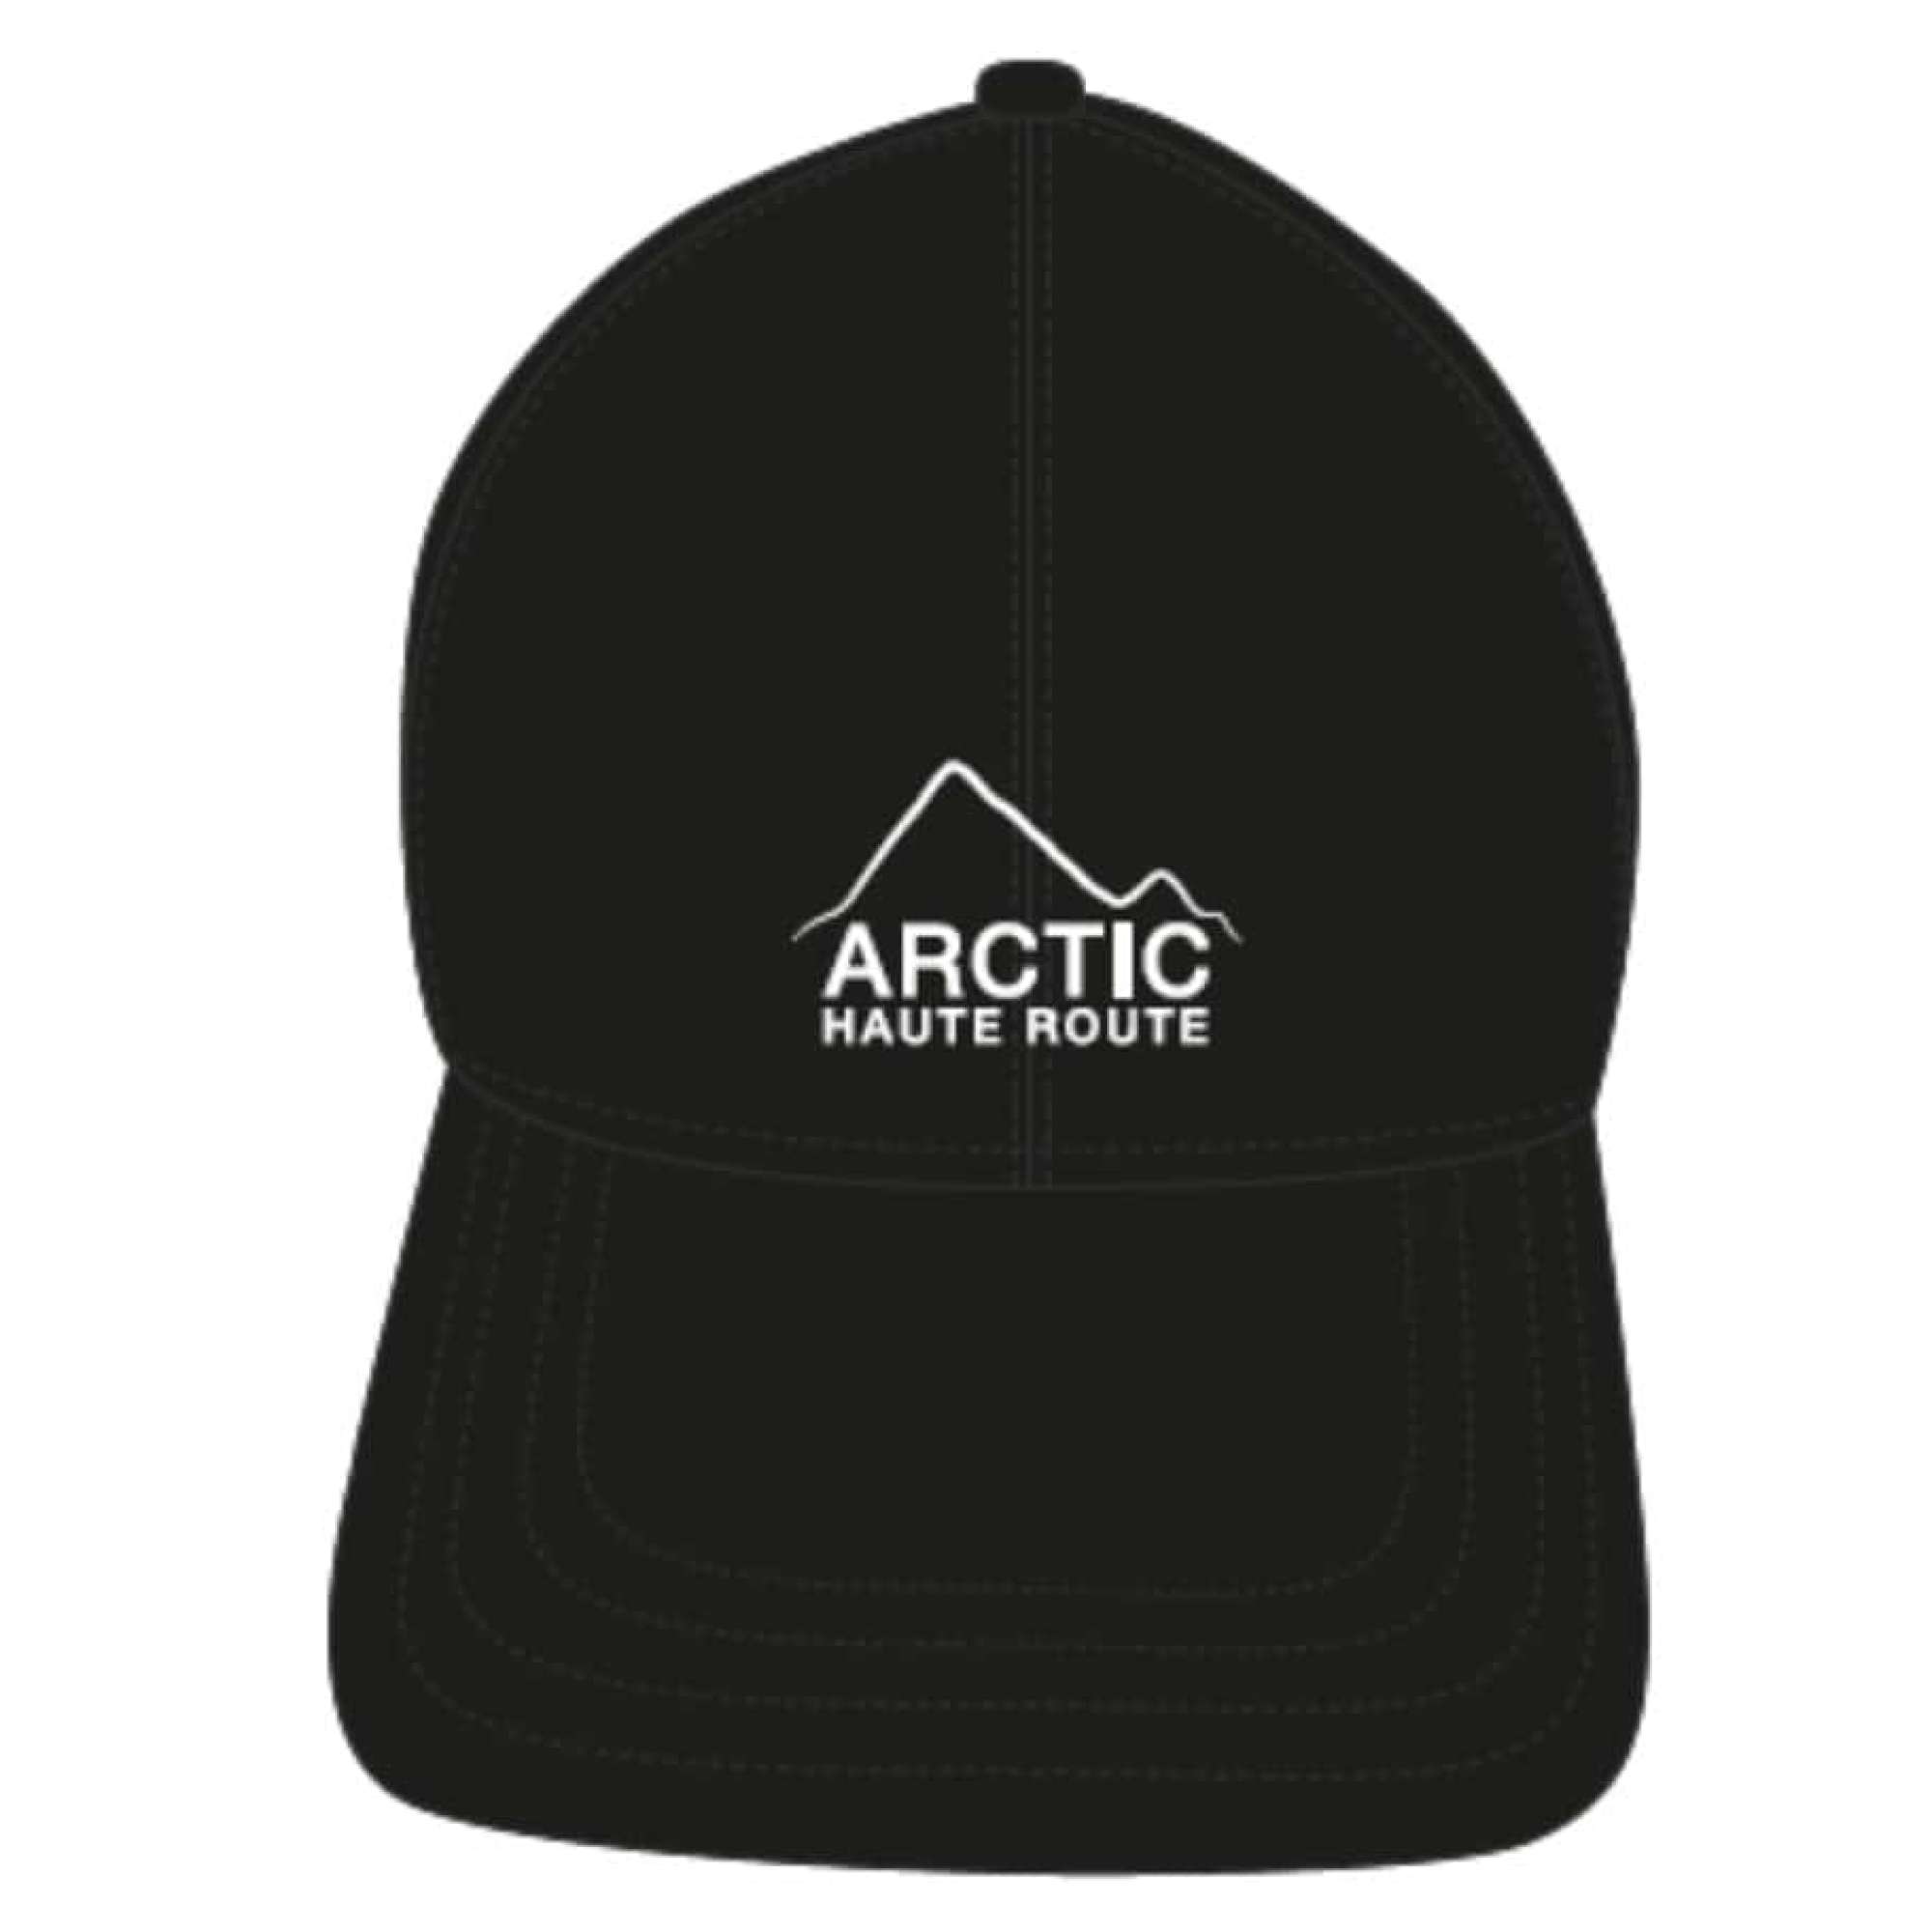 Arctic Haute Route cap by Holzweiler, Limited Edition, Unisex NAC03 – Norwegian Adventure Company